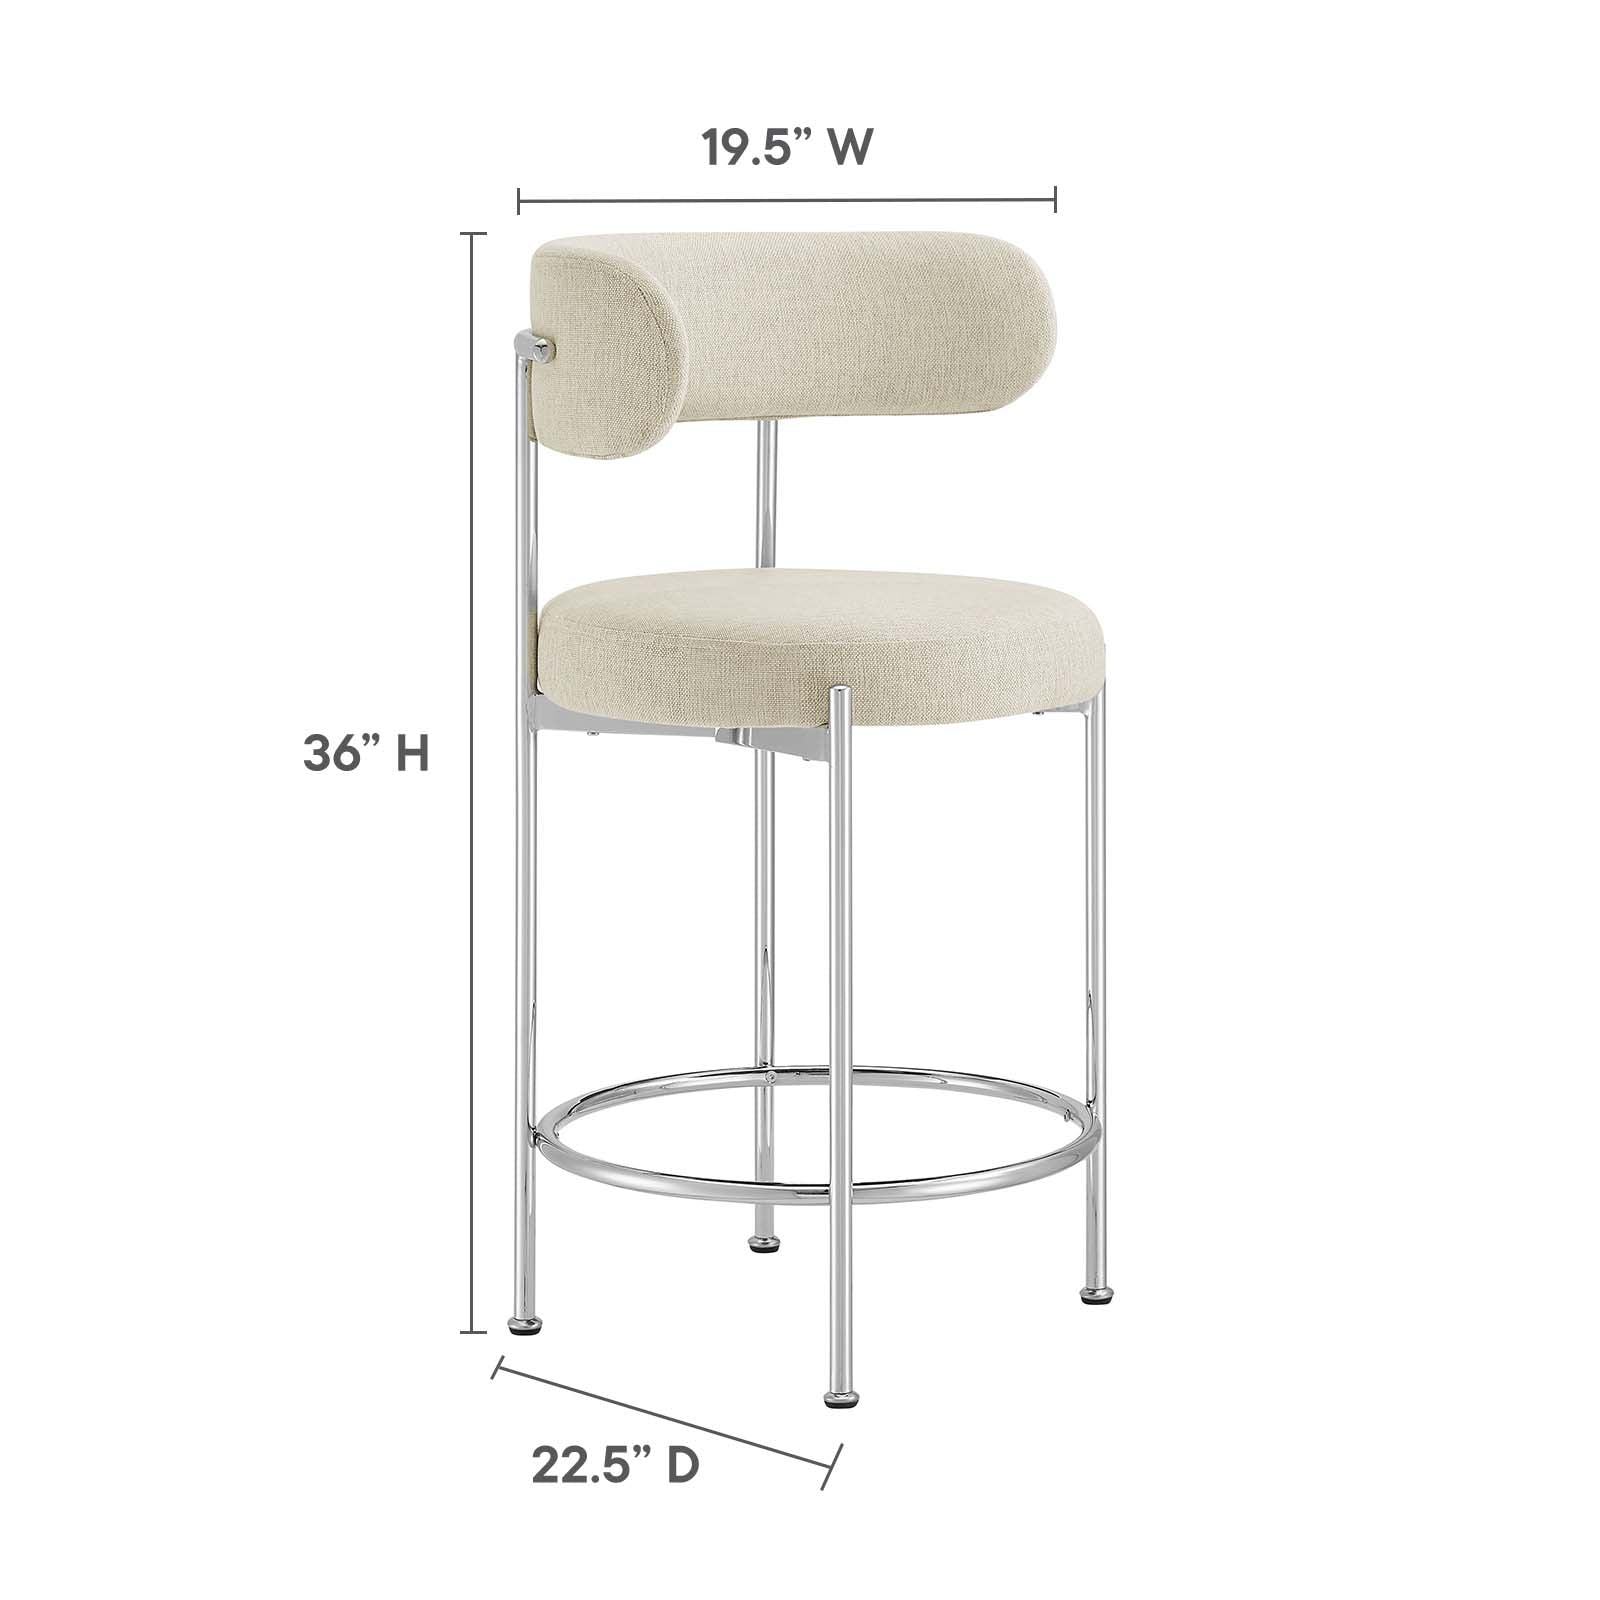 Albie Fabric Counter Stools - Set of 2 - East Shore Modern Home Furnishings